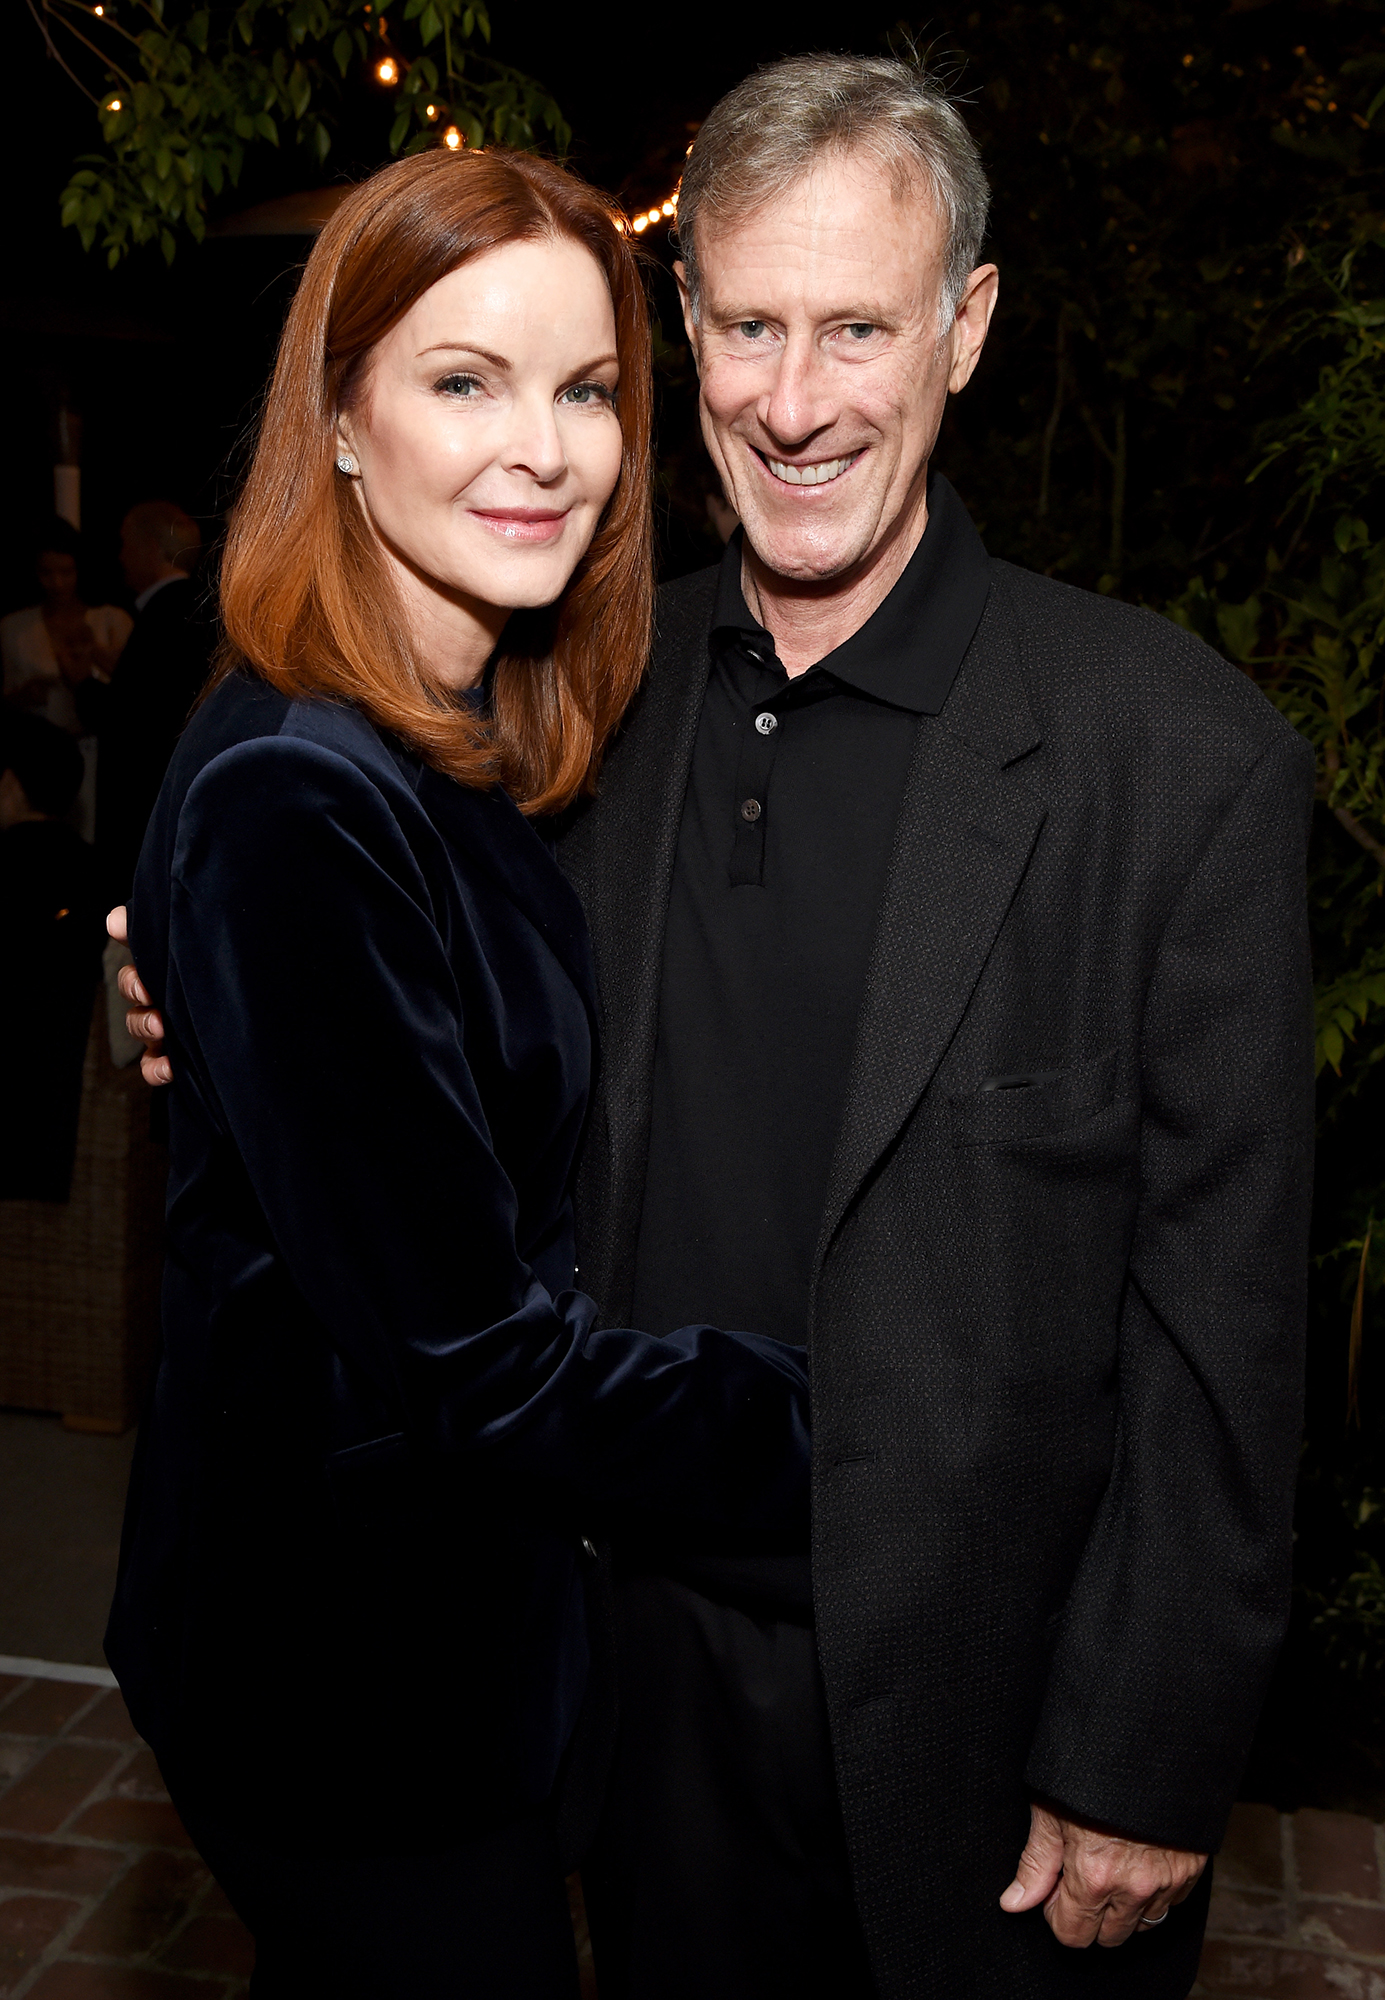 Marcia Cross Anal Sex - Marcia Cross' Anal Cancer Linked to Husband's Throat Cancer